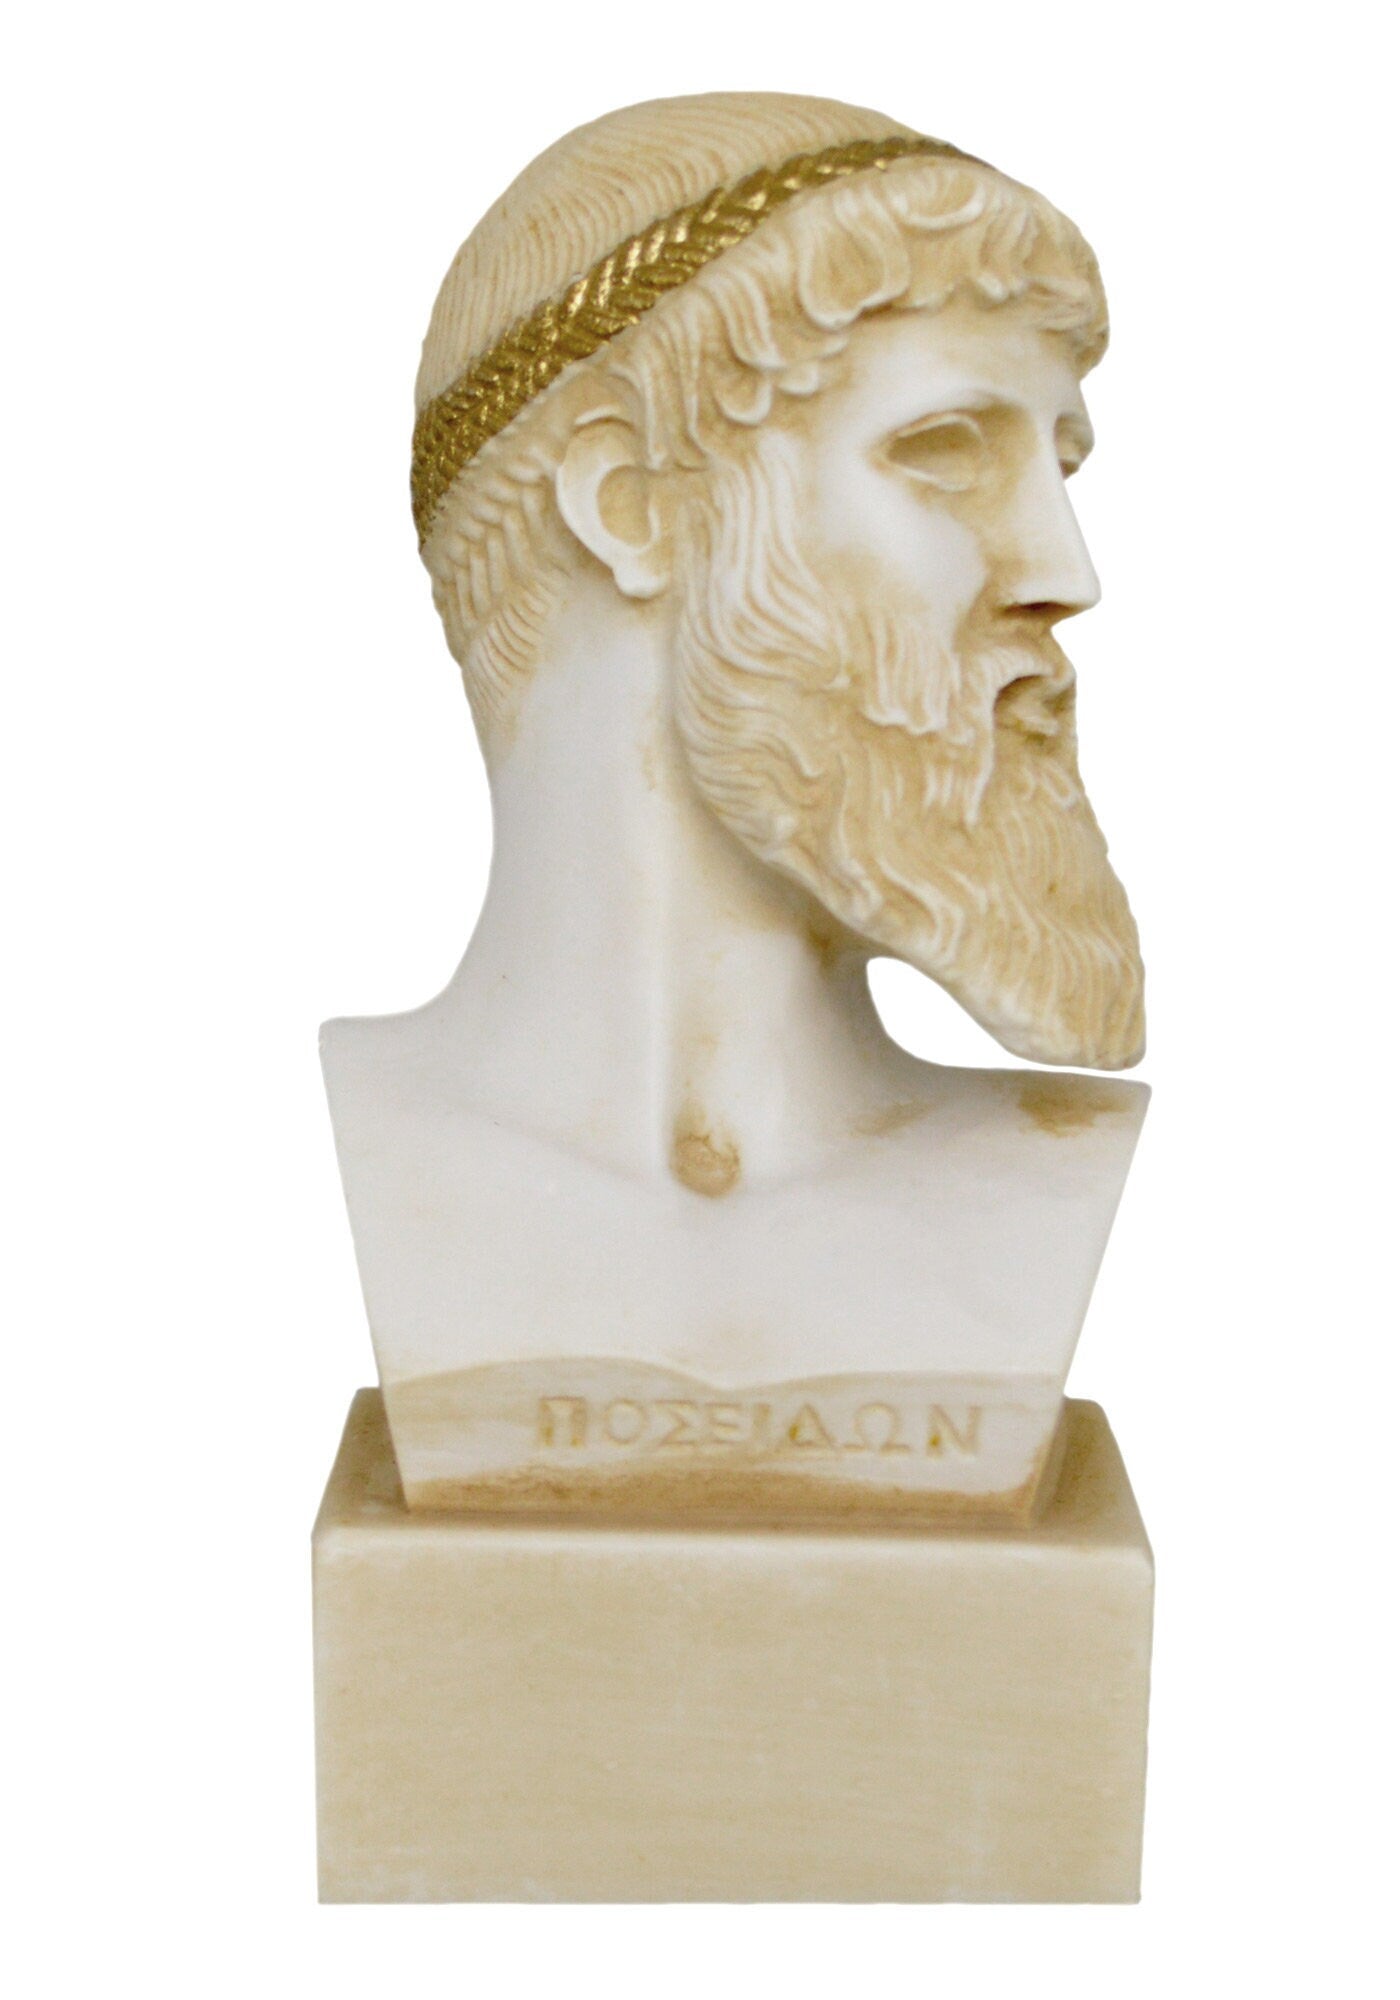 Poseidon Neptune Bust - Greek Roman God of the Sea, Storms, Earthquakes and Horses - Protector of Seafarers - Aged Alabaster  Statue